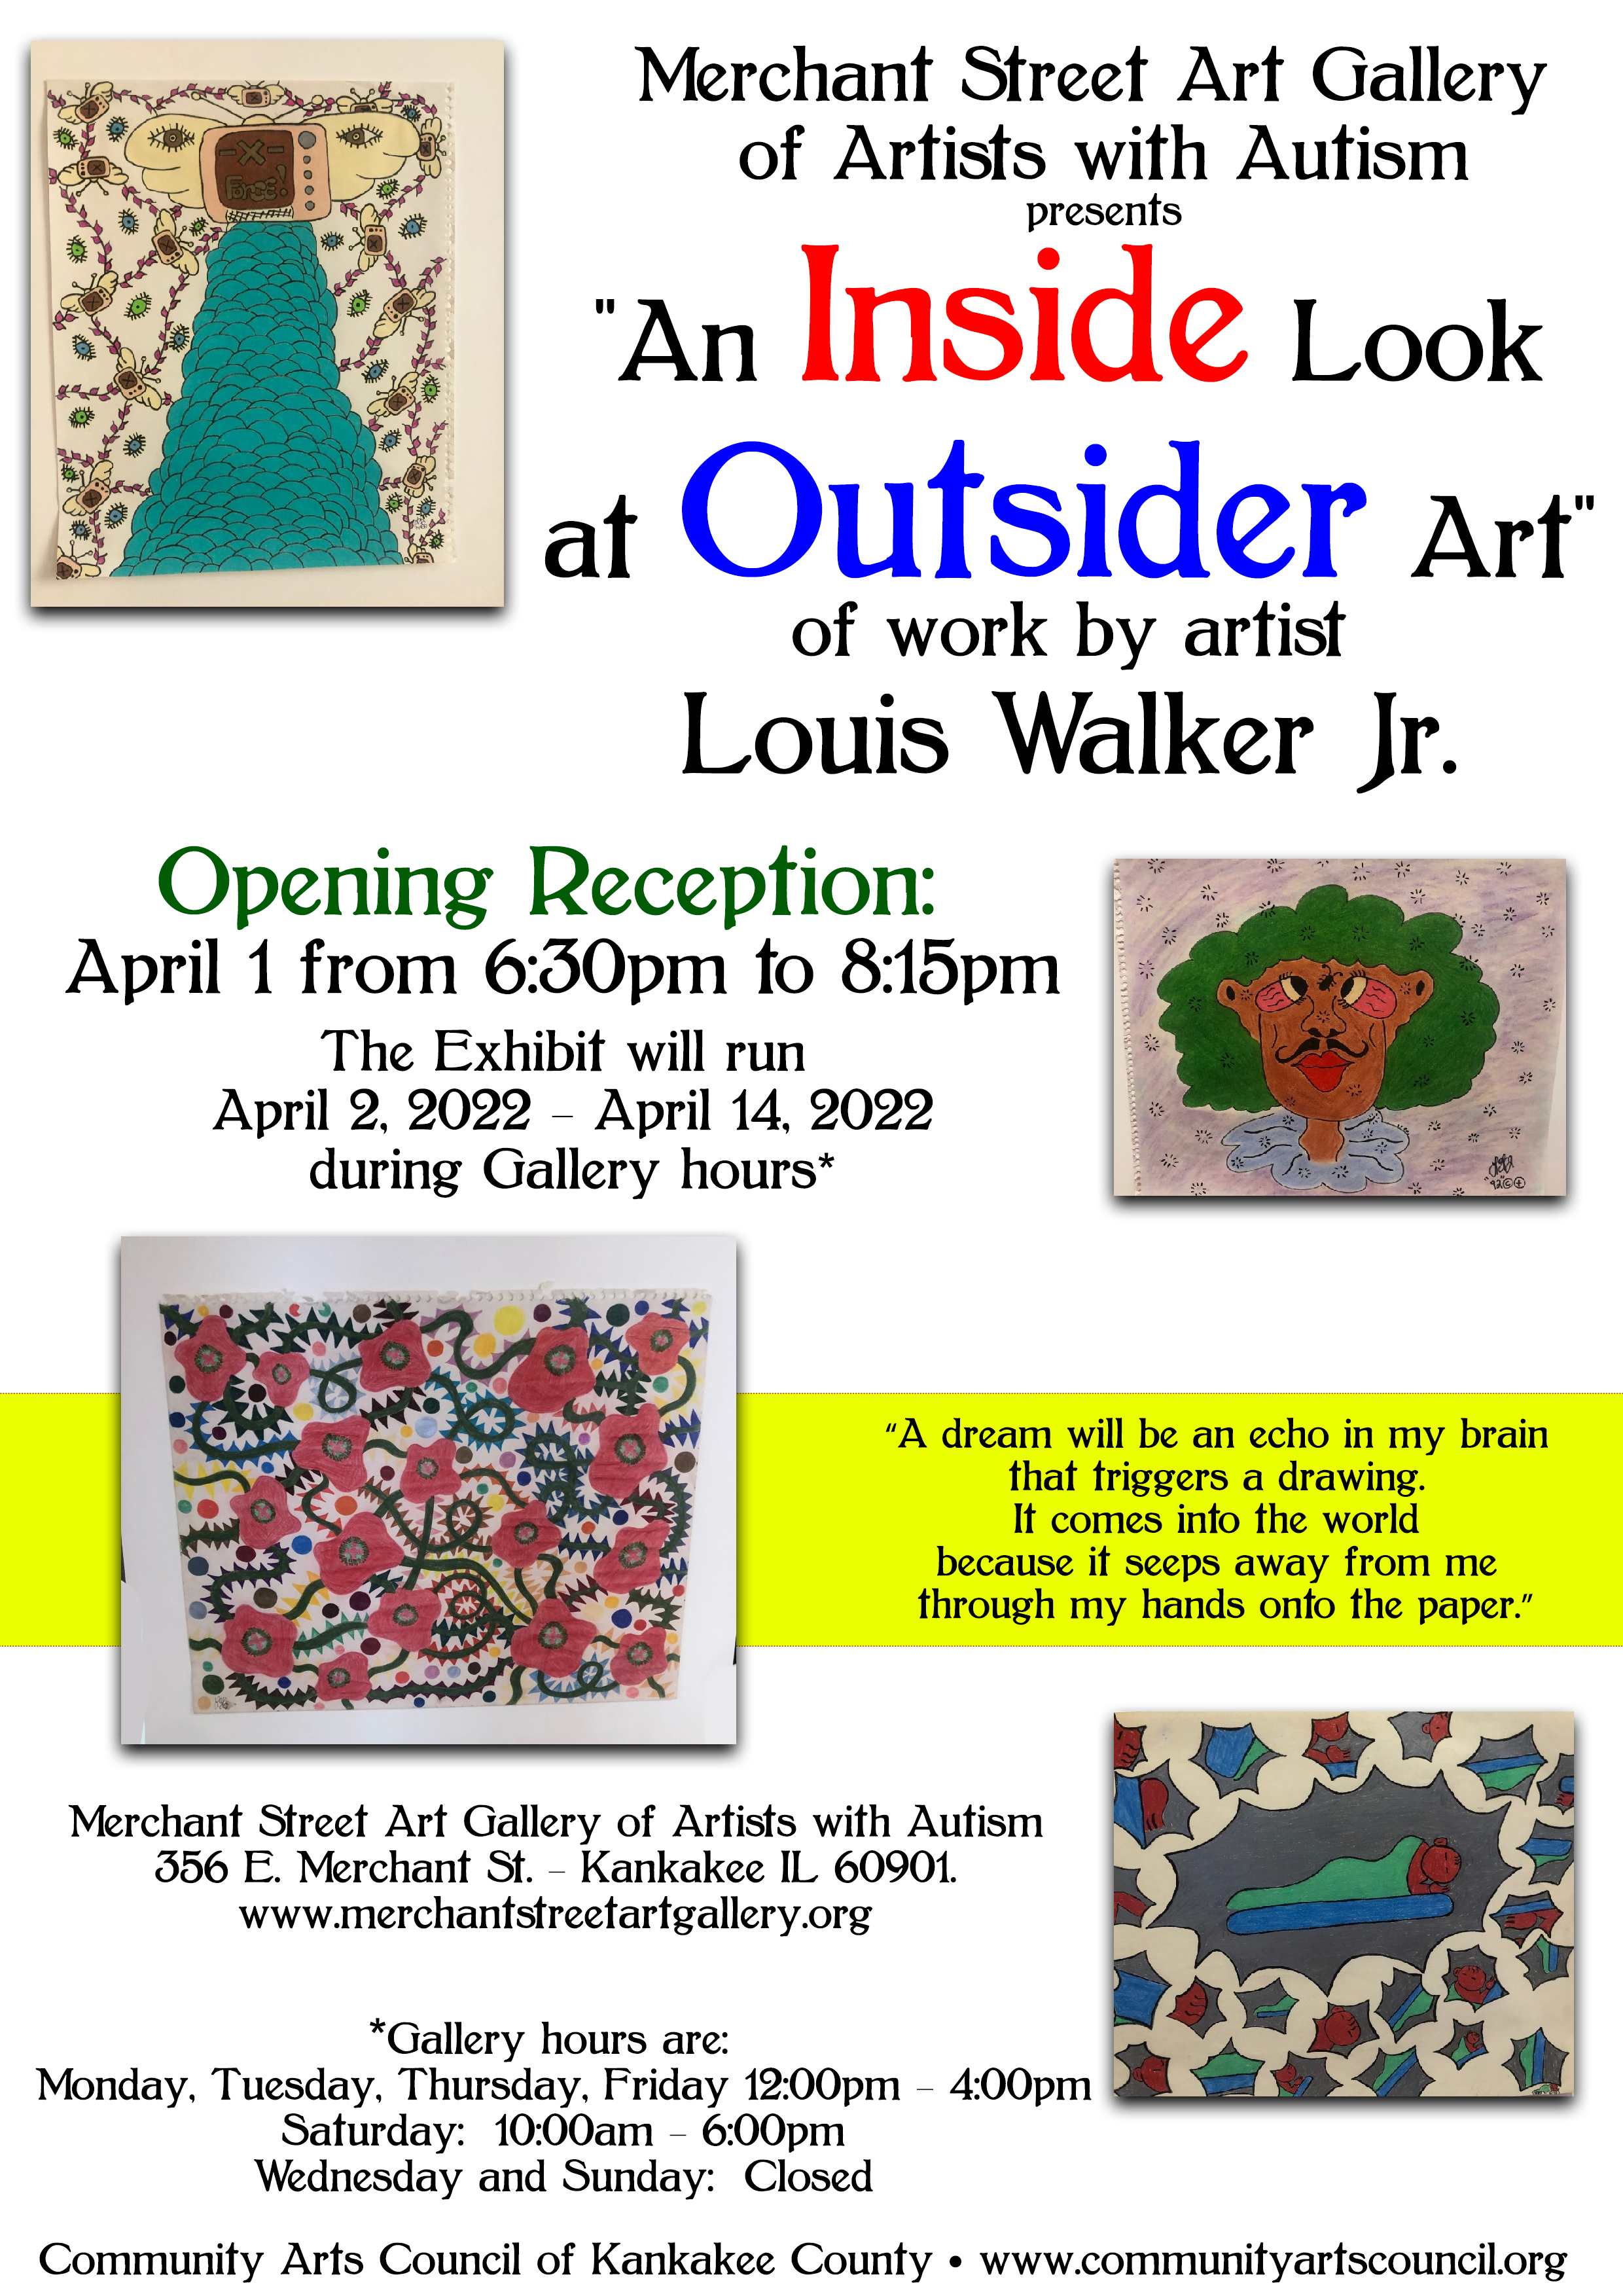 An inside look and Outsider Art